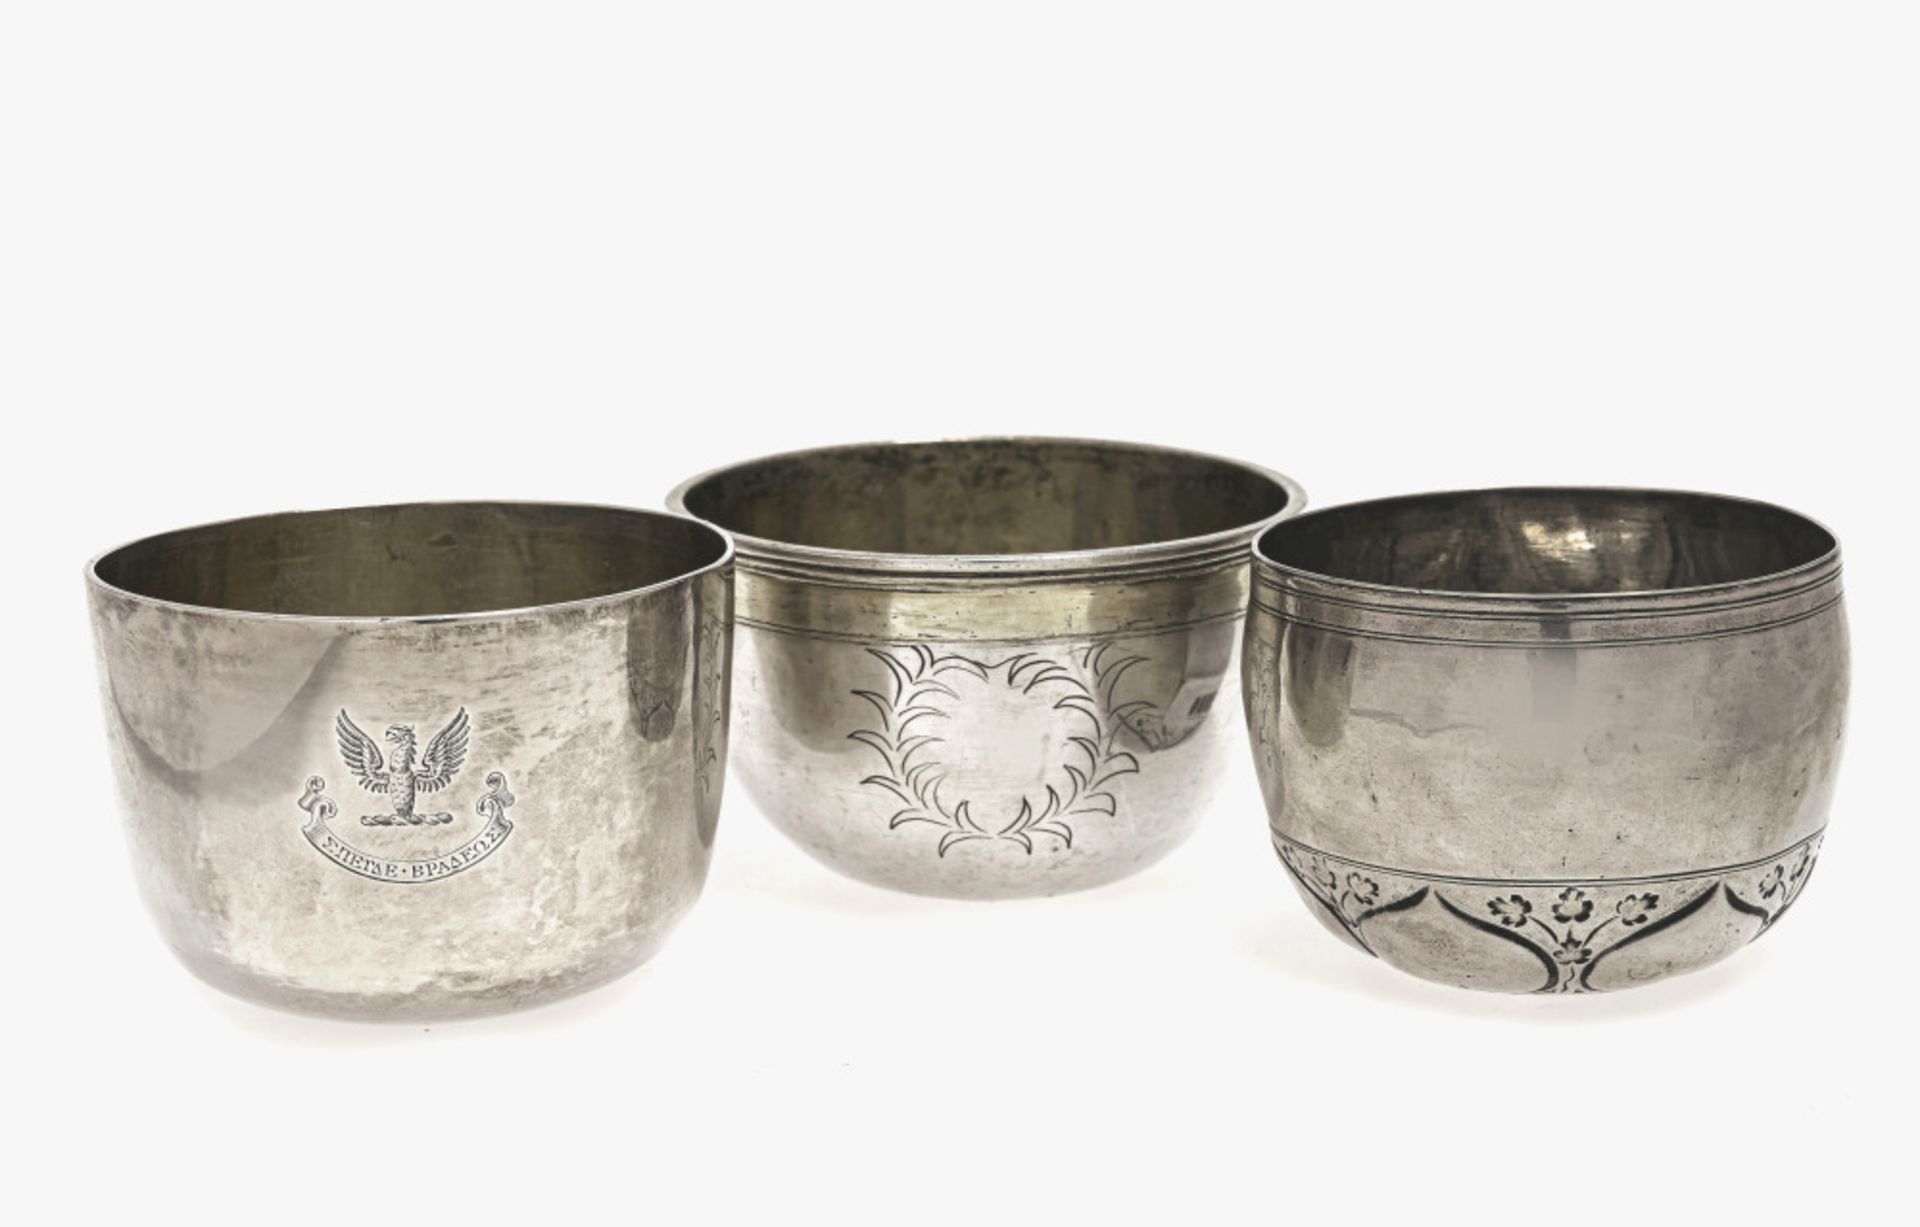 Three tumbler cups - London, Augsburg among others, early 18th century, Richard Bayley and others